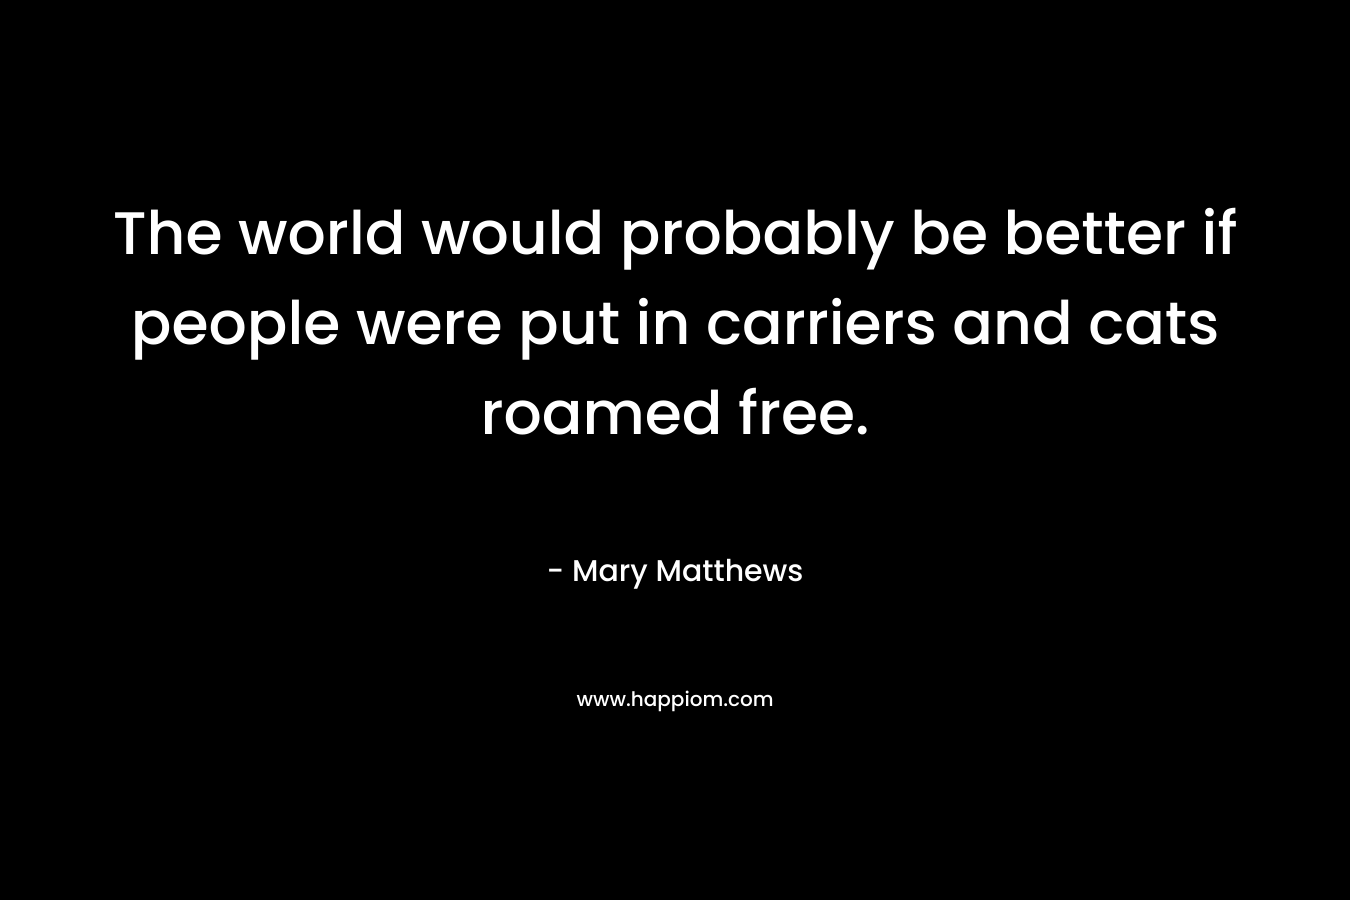 The world would probably be better if people were put in carriers and cats roamed free. – Mary Matthews